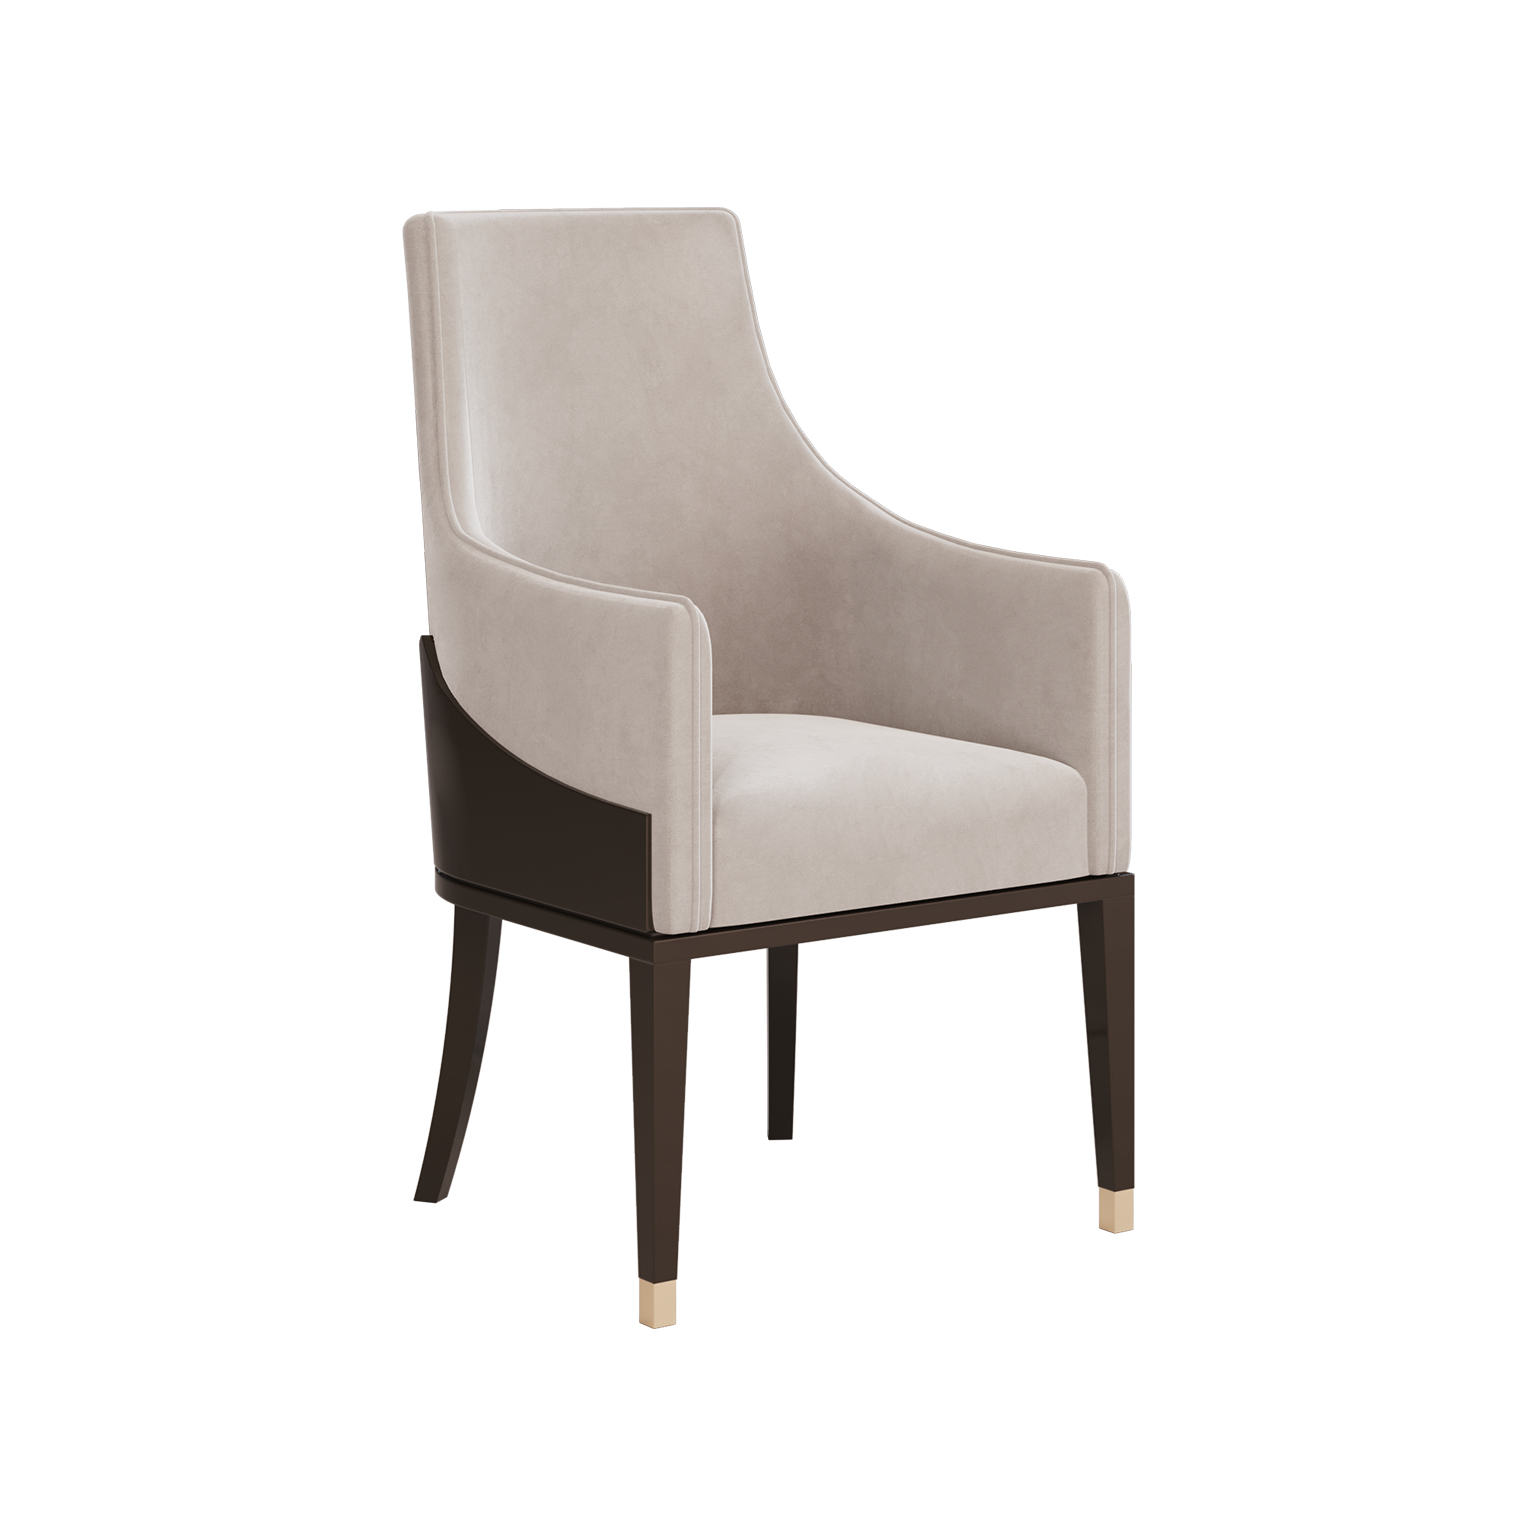 Ella dining Chair with arms and brown lacquer detail on back